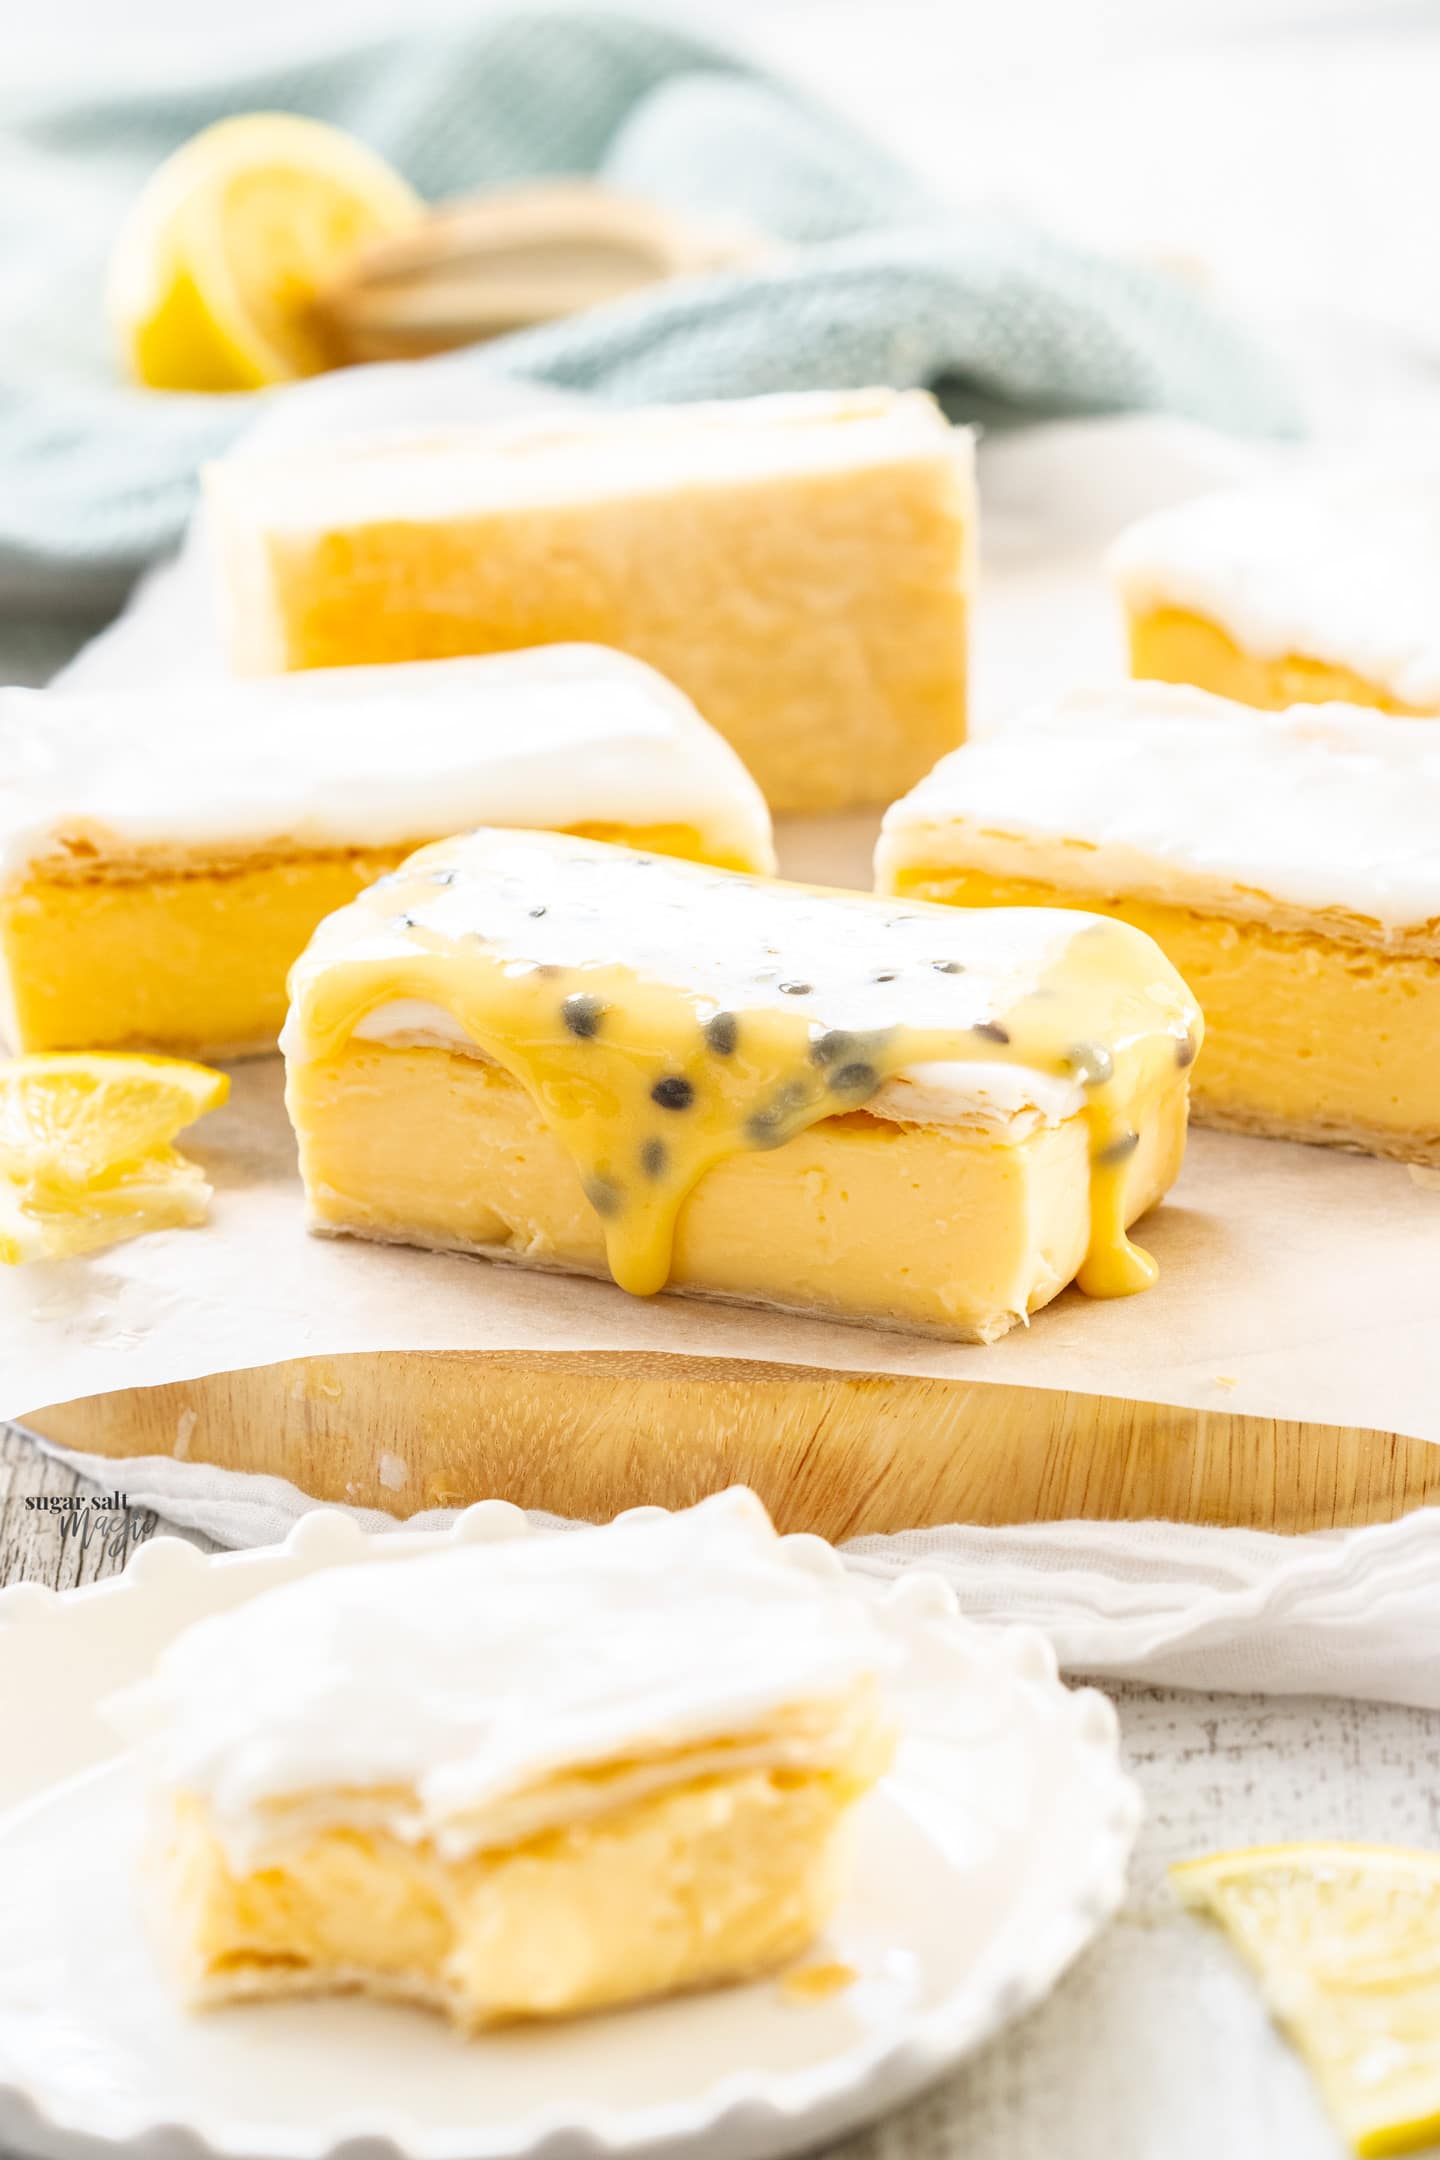 Slices of custard slice on a wooden board, the front one topped with passionfruit icing.